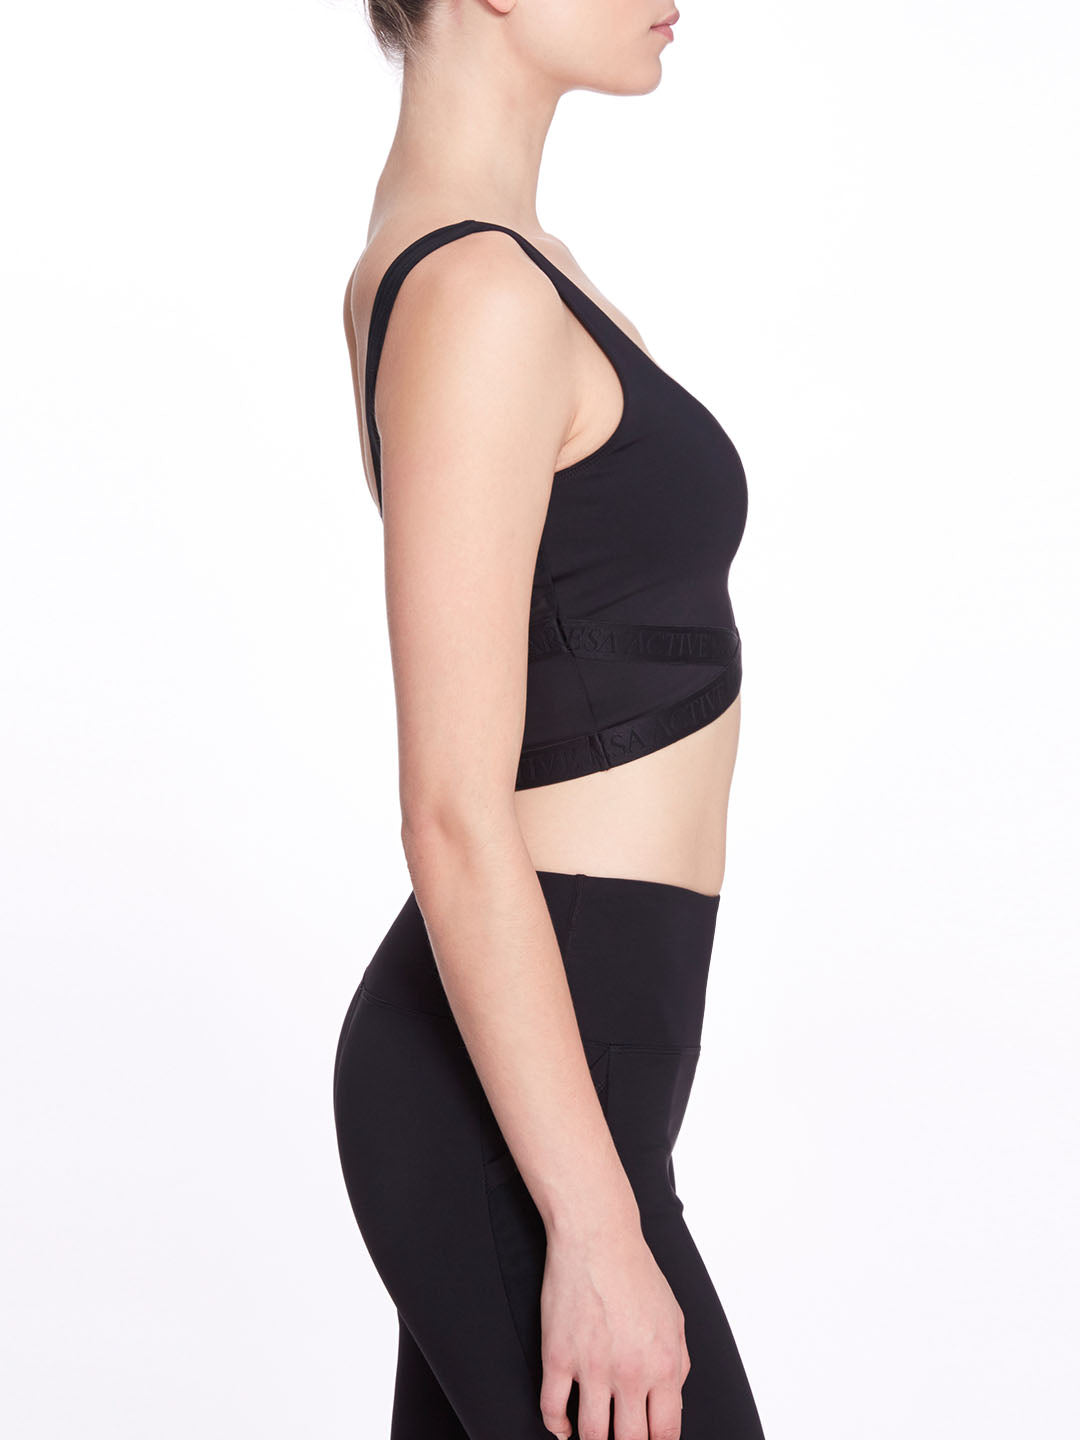 Black Scoop Neck Sports Bra With Criss Cross and Mesh Detail